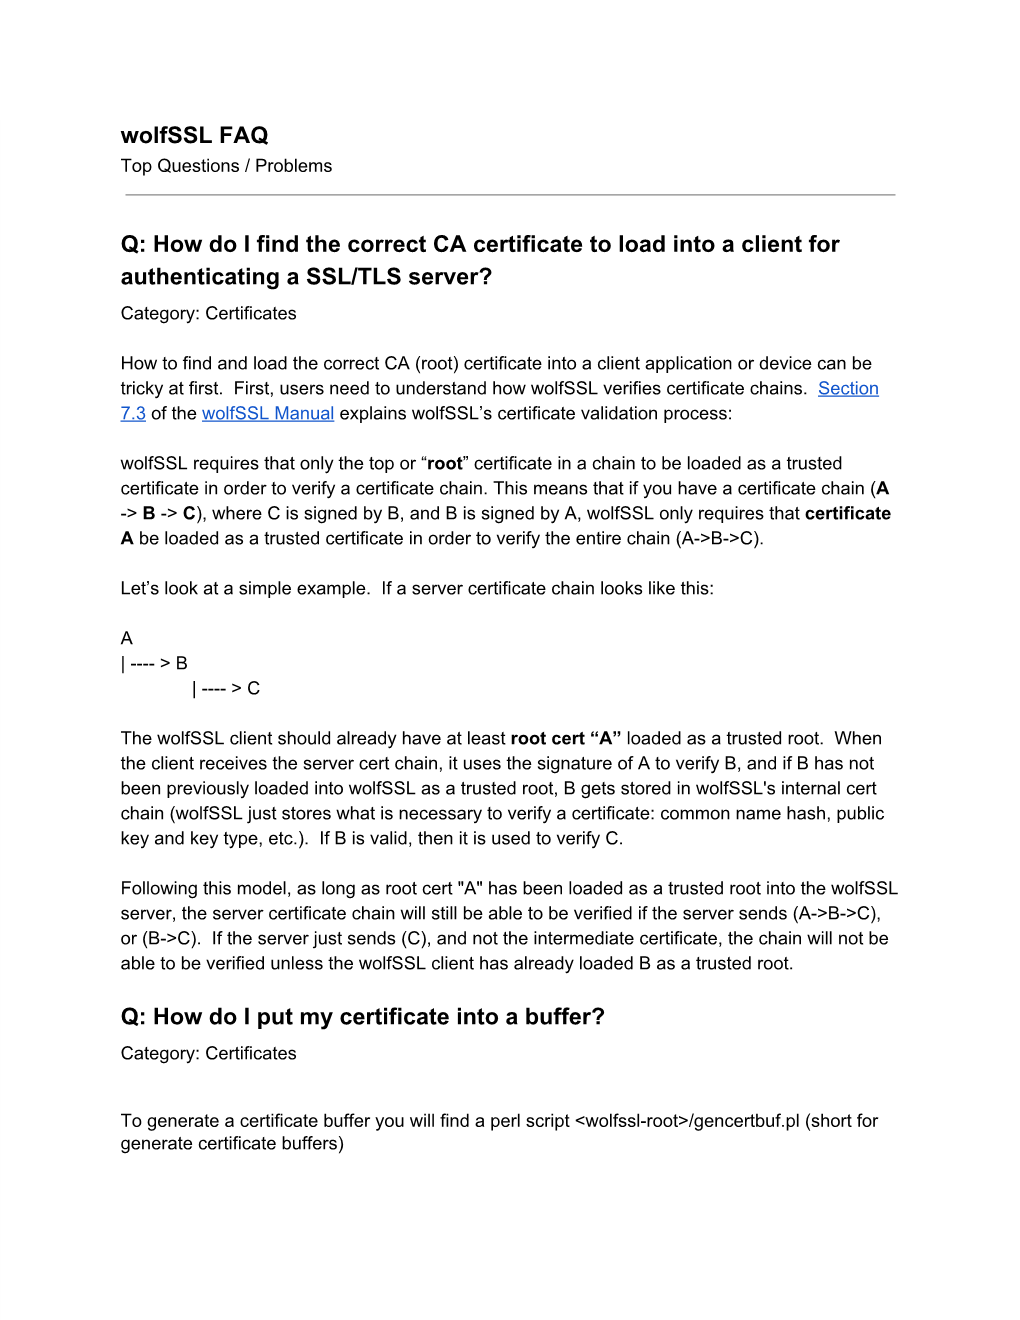 Wolfssl FAQ Q: How Do I Find the Correct CA Certificate to Load Into A